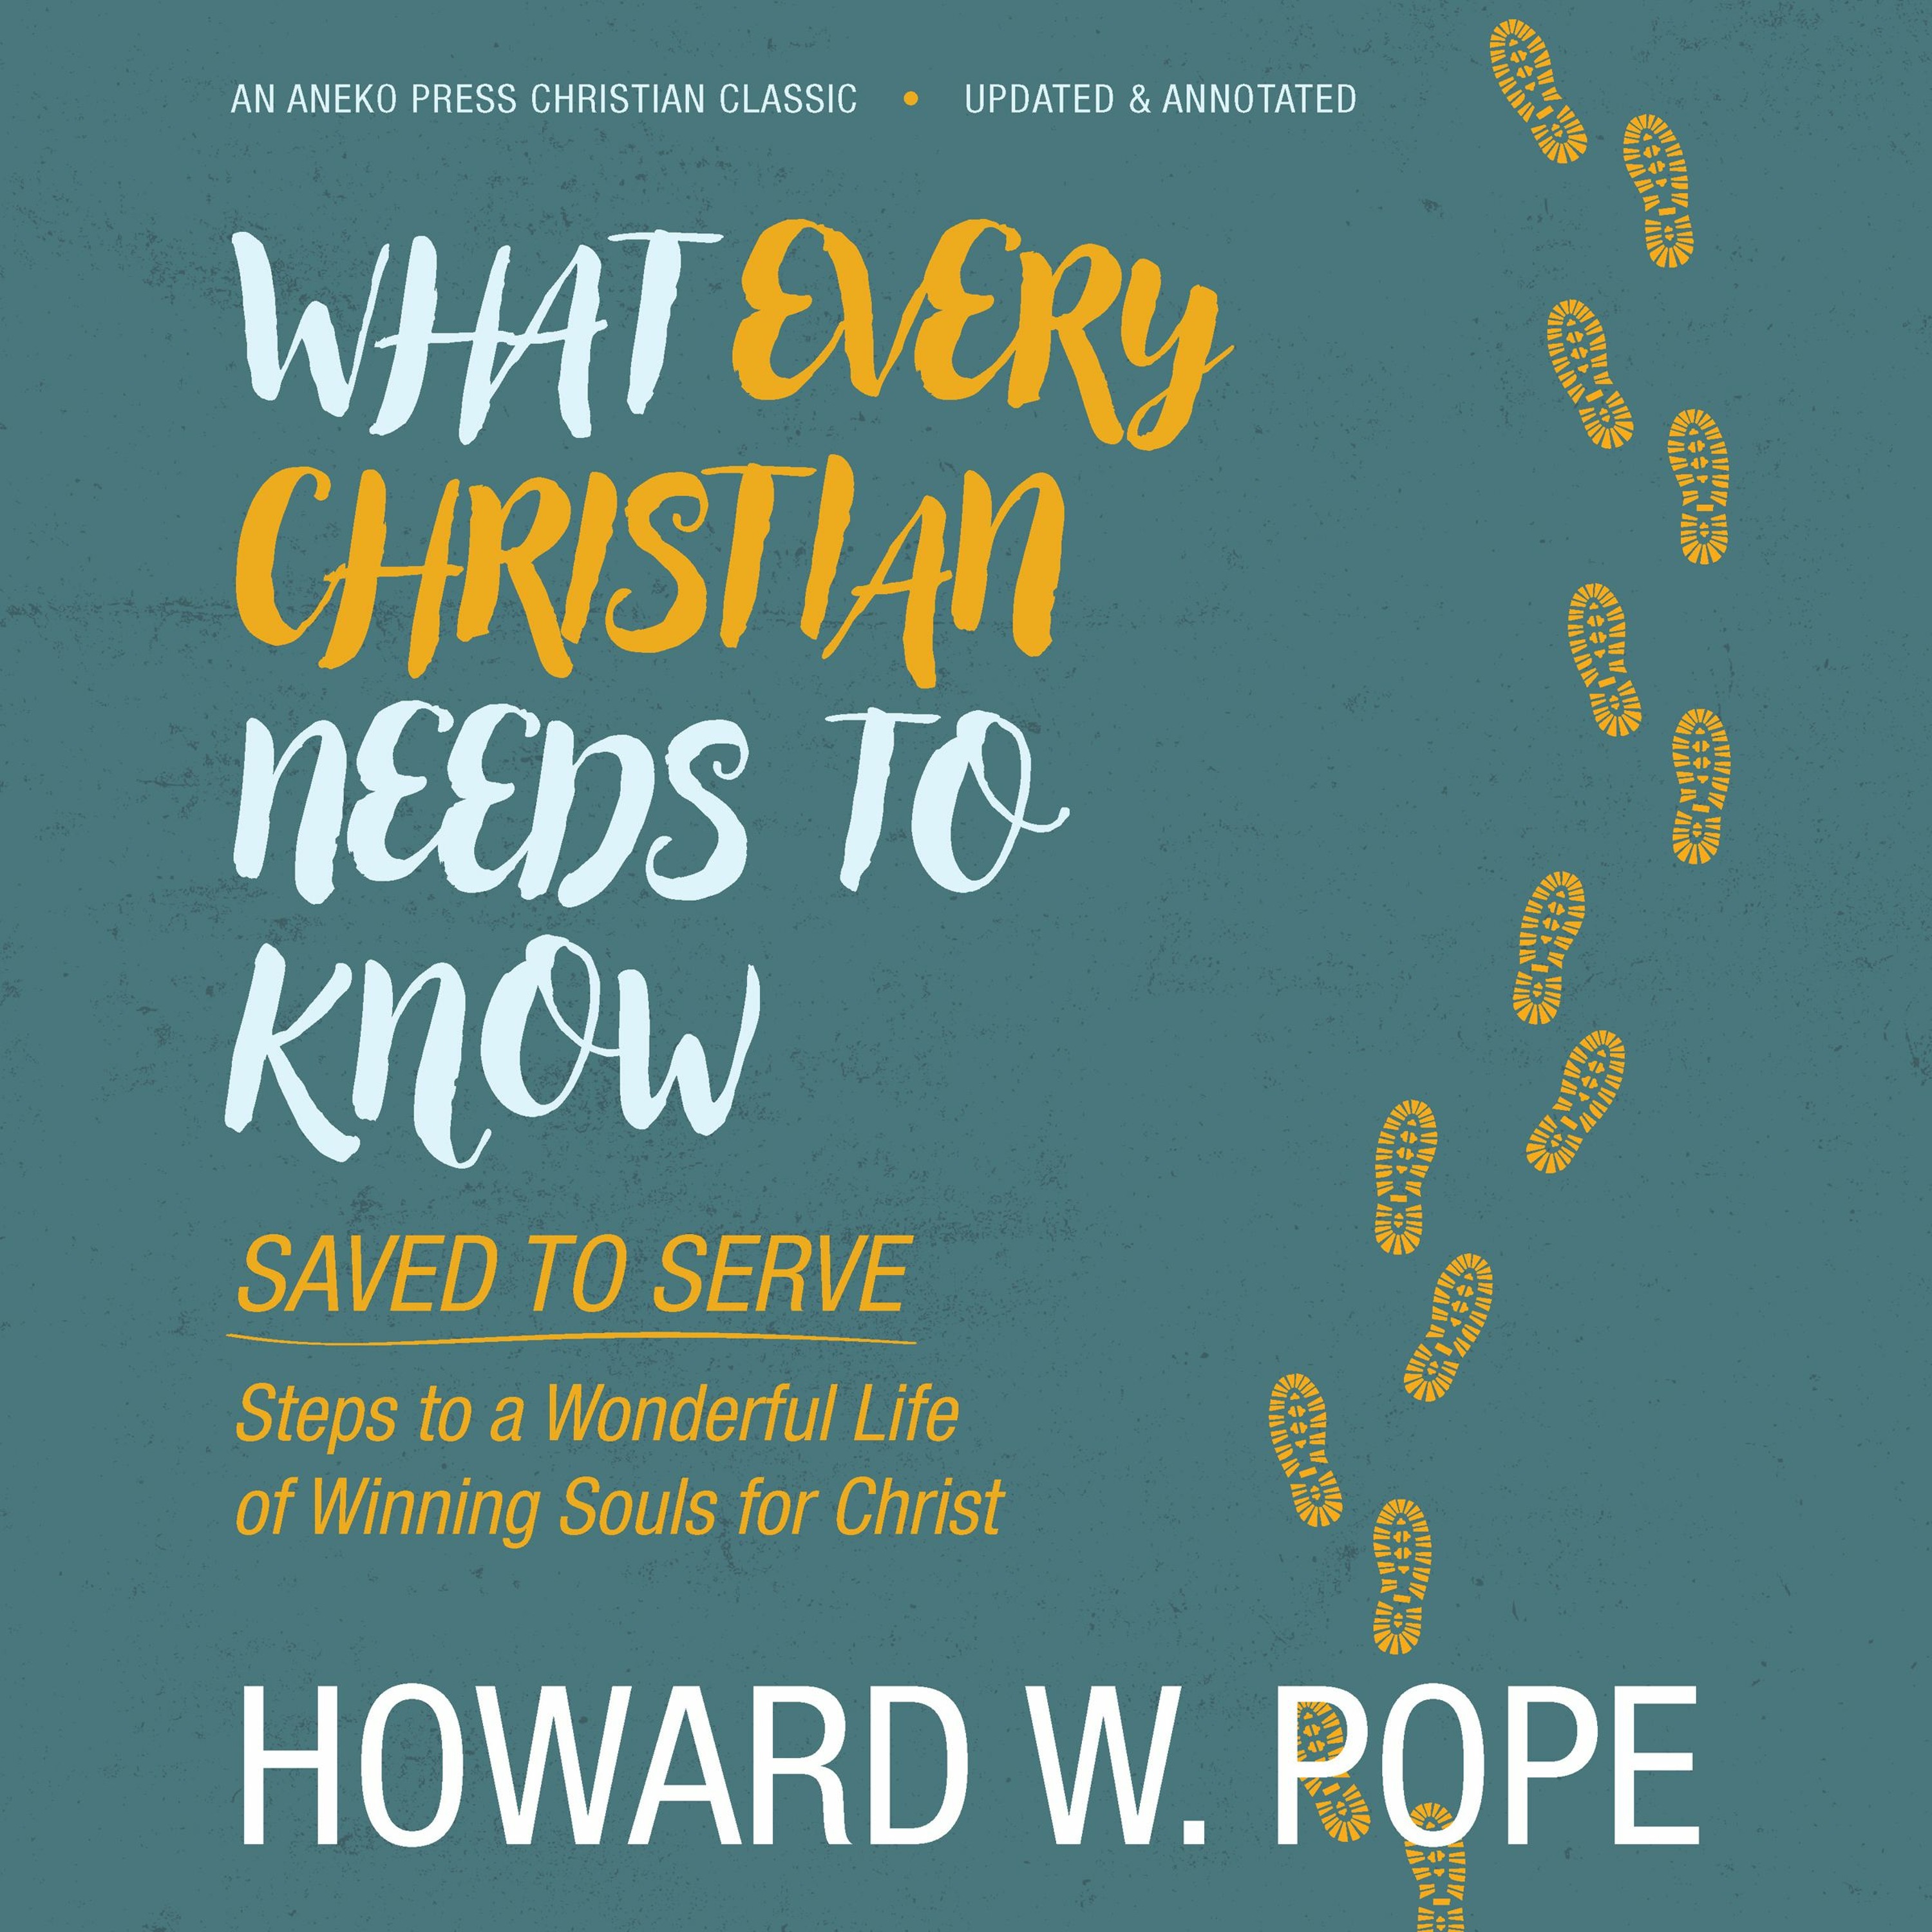 Preface - What Every Christian Needs to Know